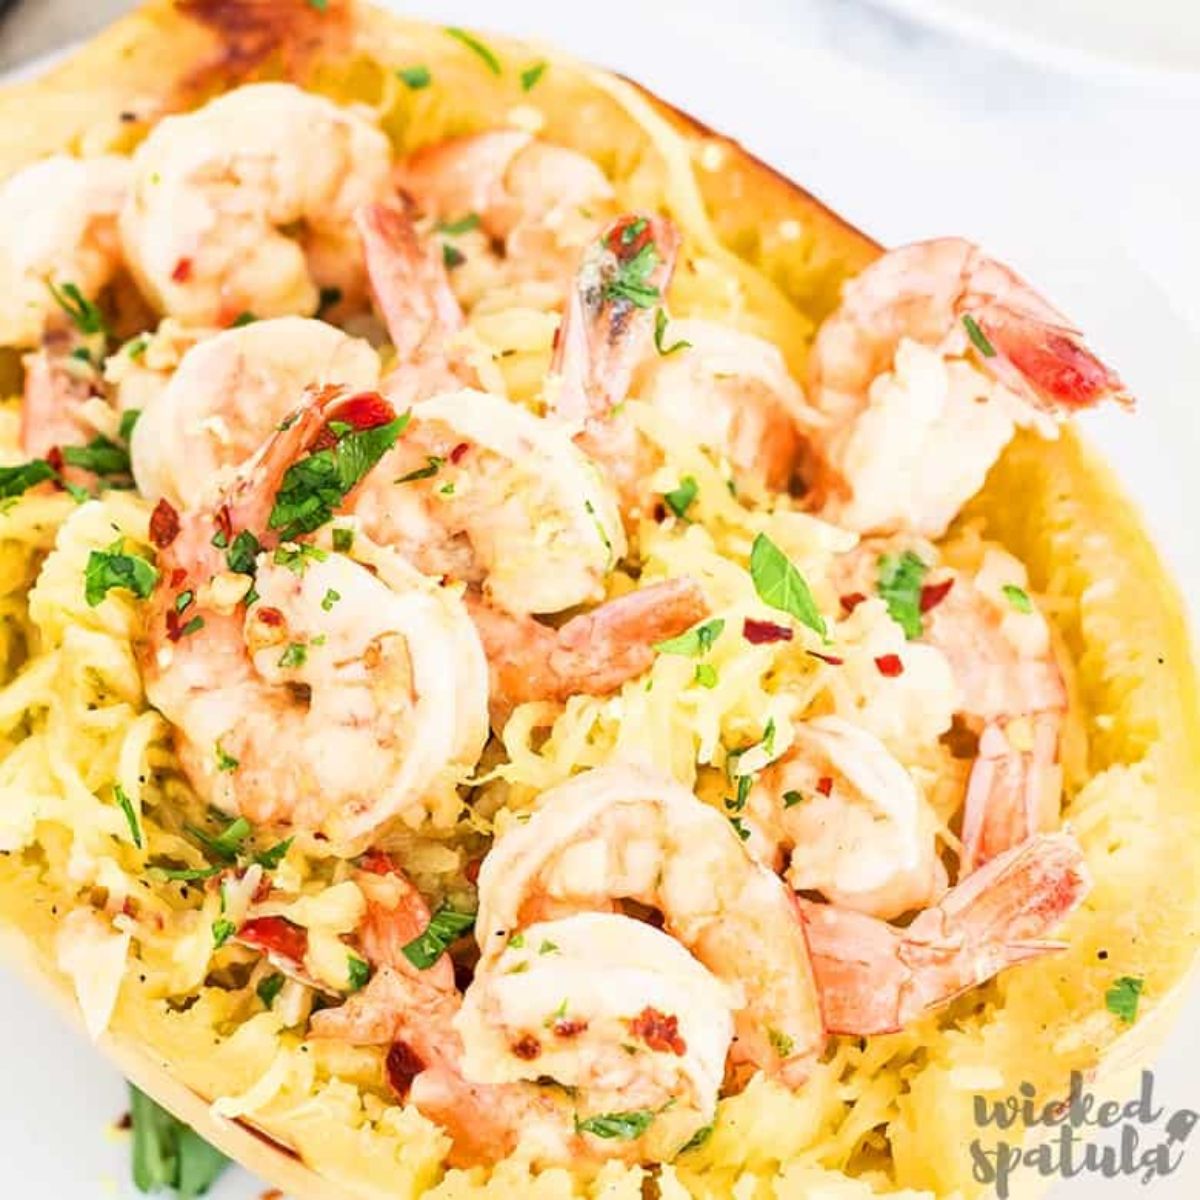 a hollowed out baked spaghetti squash filled with shrimp and herbs